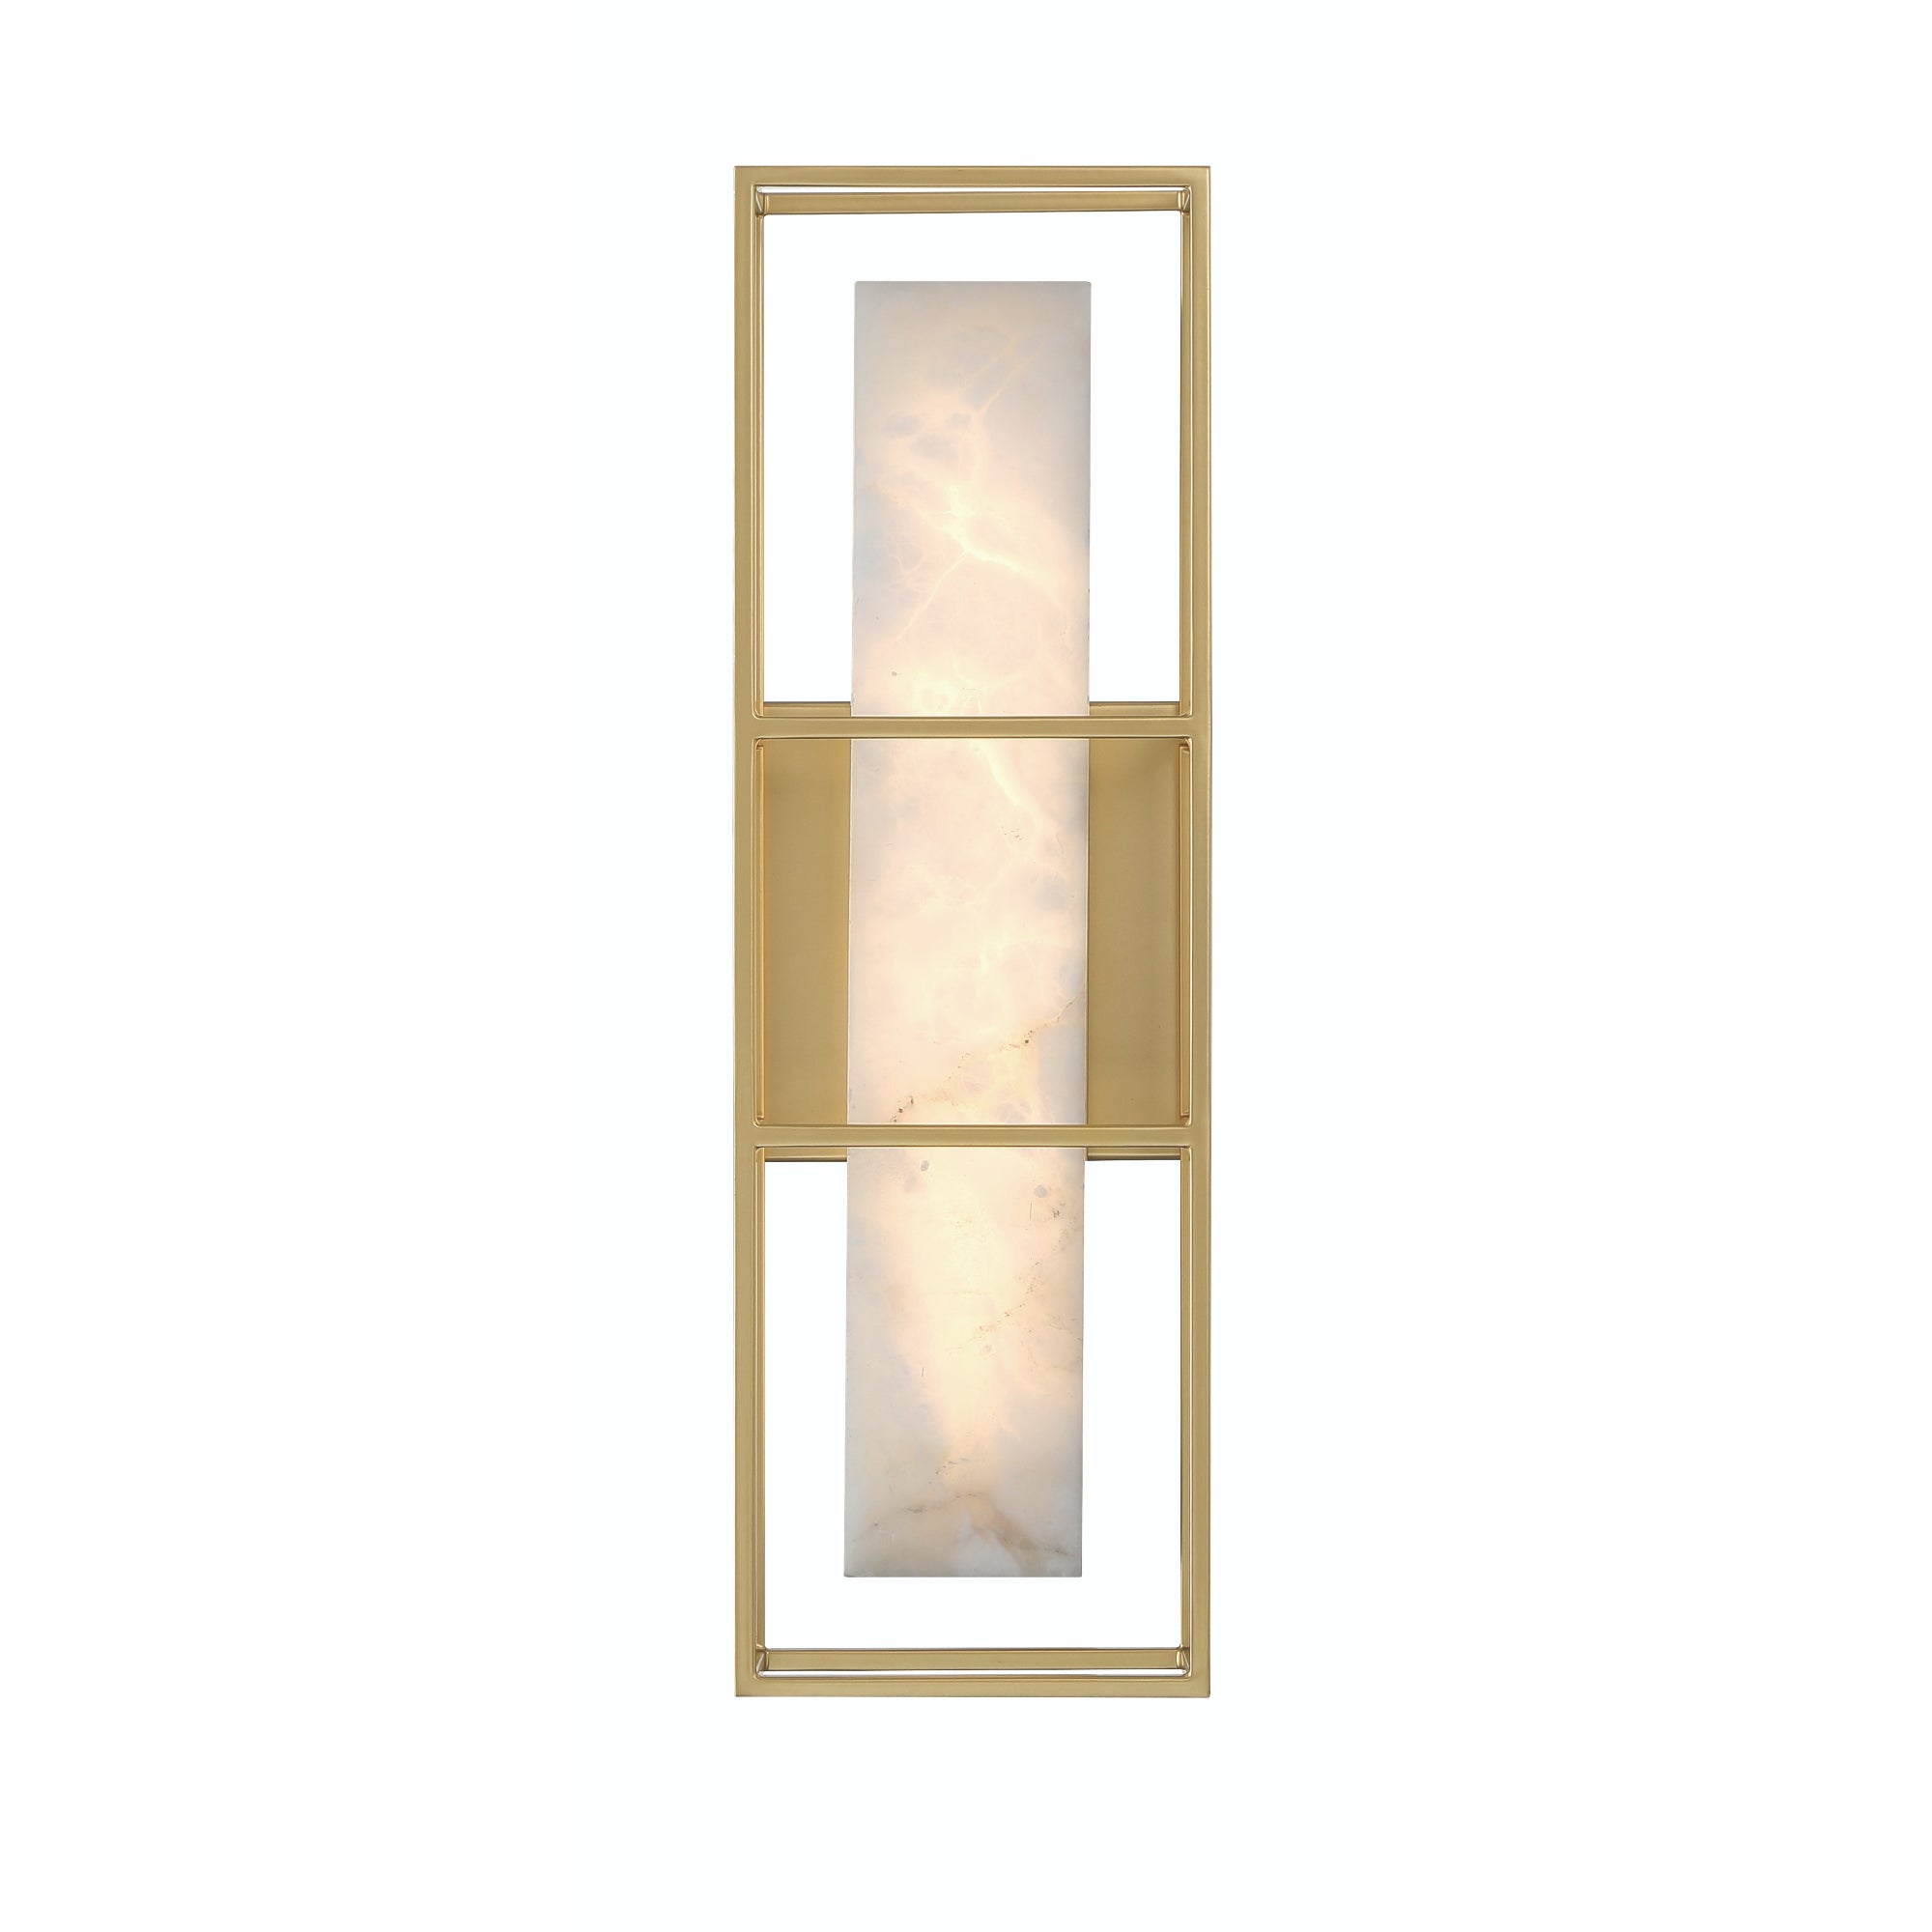 BLAKLEY Wall sconce Gold INTEGRATED LED - 46837-028 | EUROFASE